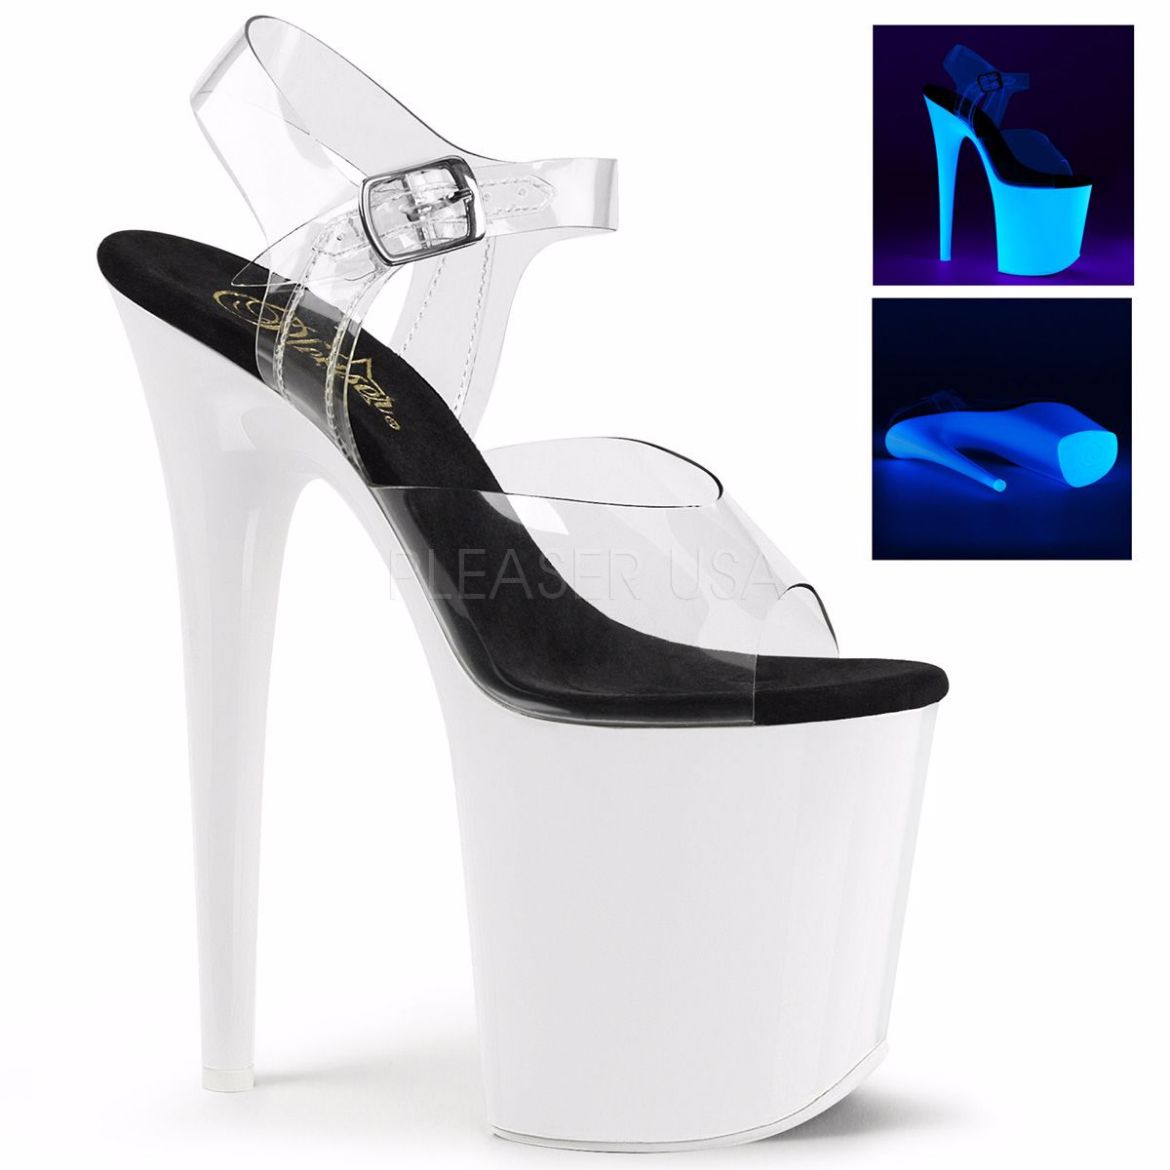 Product image of Pleaser Flamingo-808Uv Clear/Neon White, 8 inch (20.3 cm) Heel, 4 inch (10.2 cm) Platform Sandal Shoes